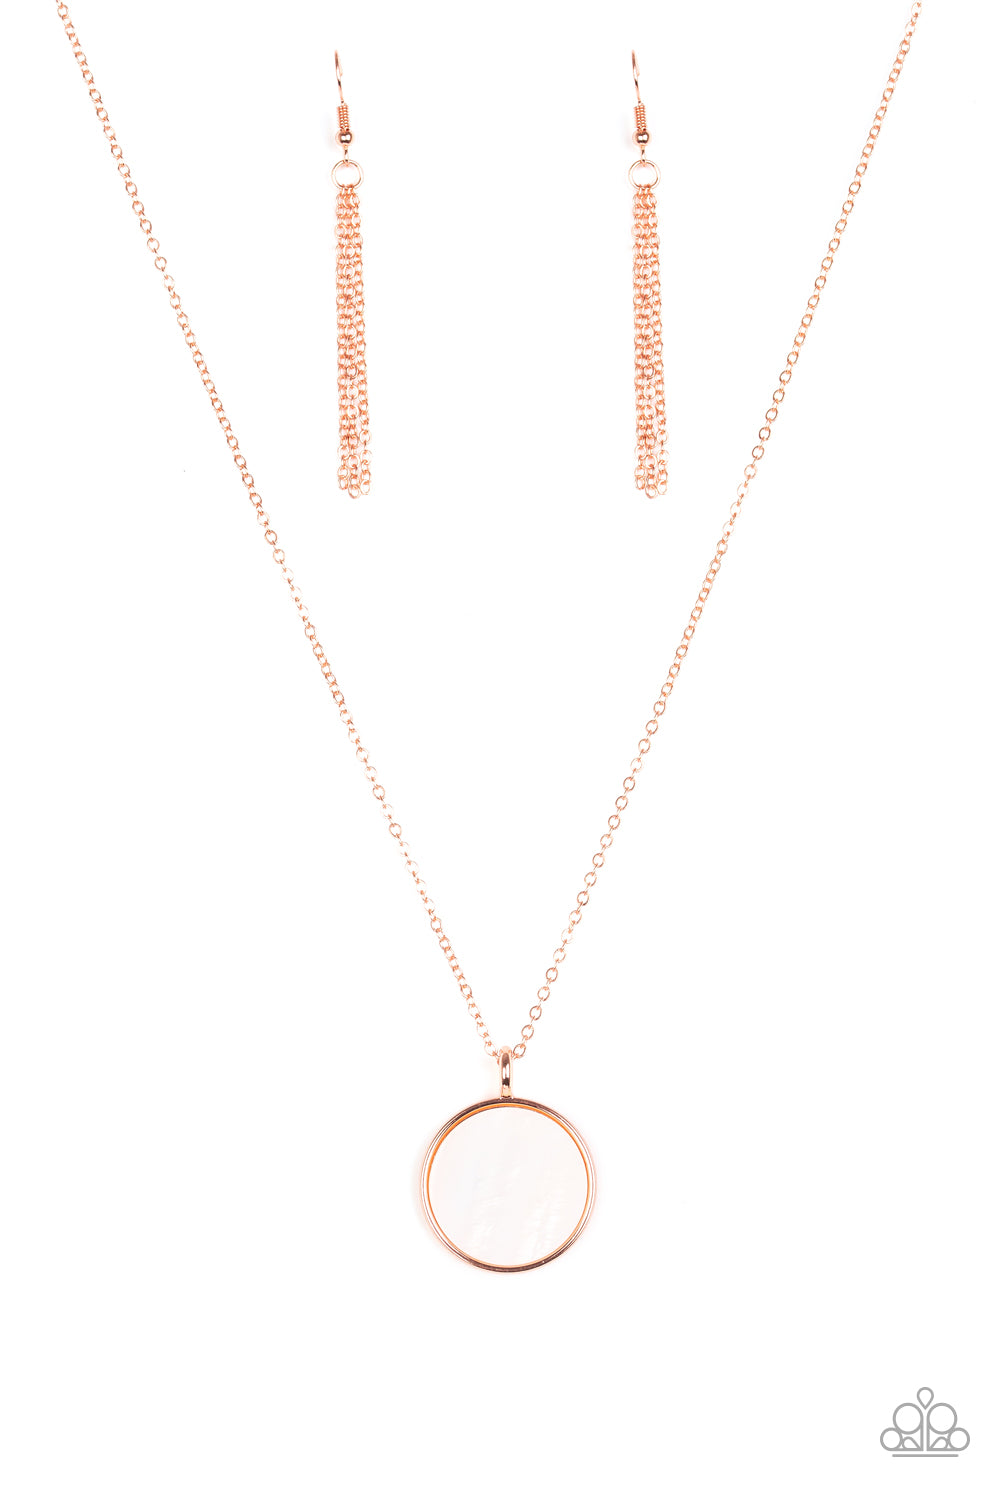 Paparazzi Accessories - A flat shell-like pendant swings from the bottom of a dainty shiny copper chain below the collar for a refined look. Features an adjustable clasp closure. 